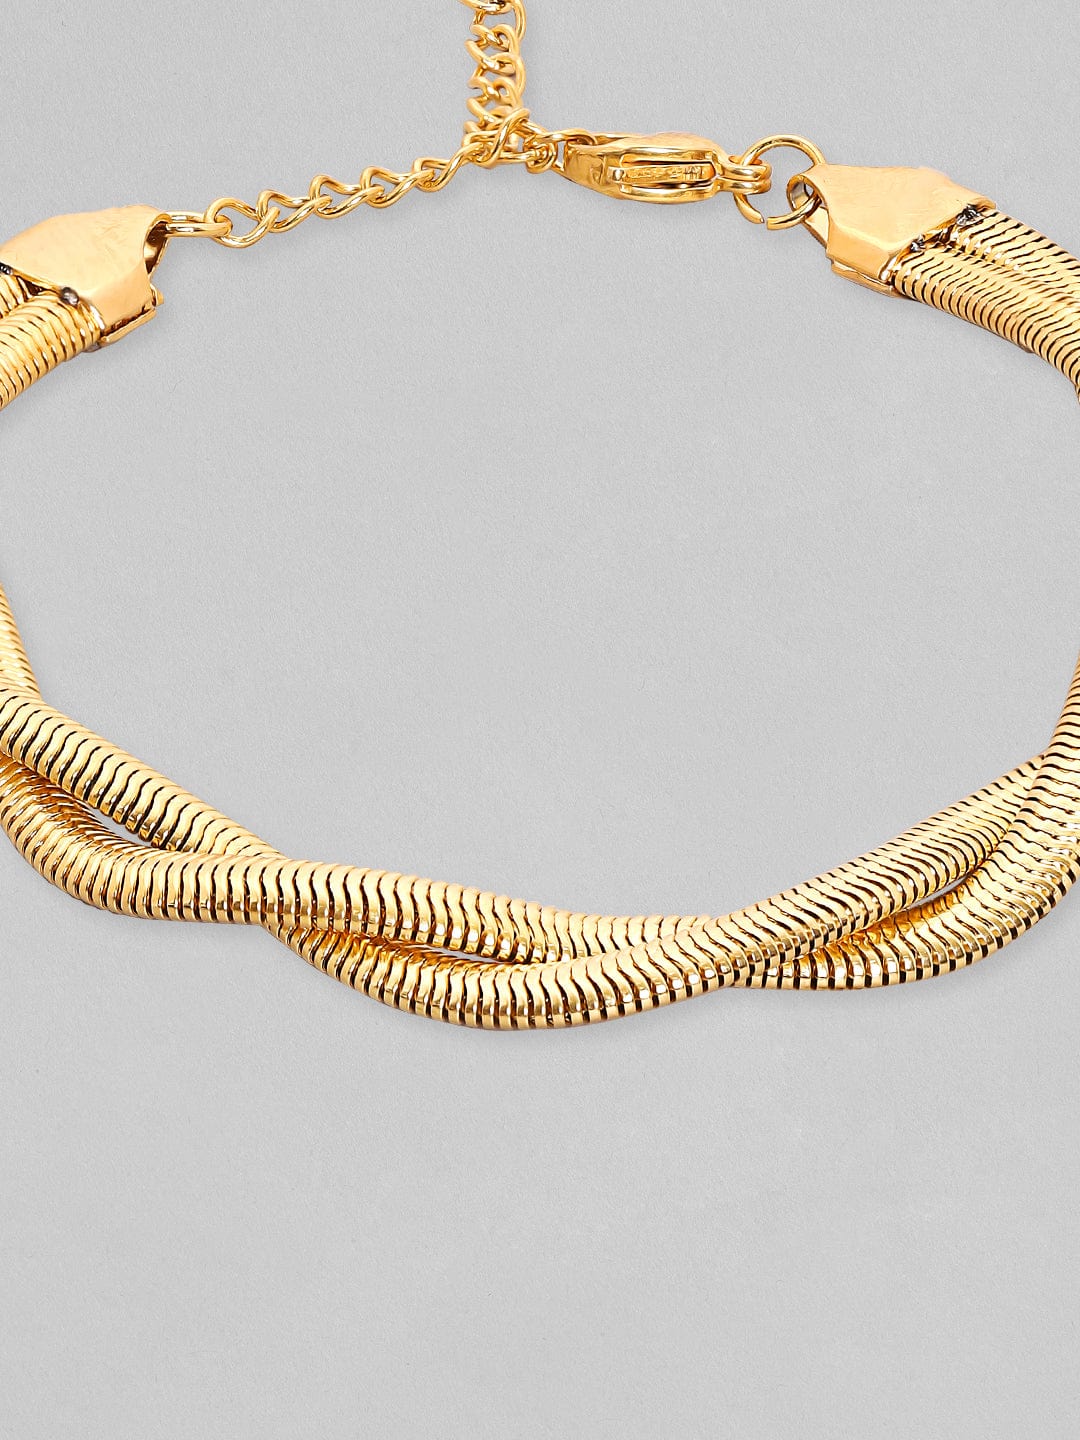 Buy Gold Snake Chain Bracelet Round Snake Chain Thick Online in India  Etsy